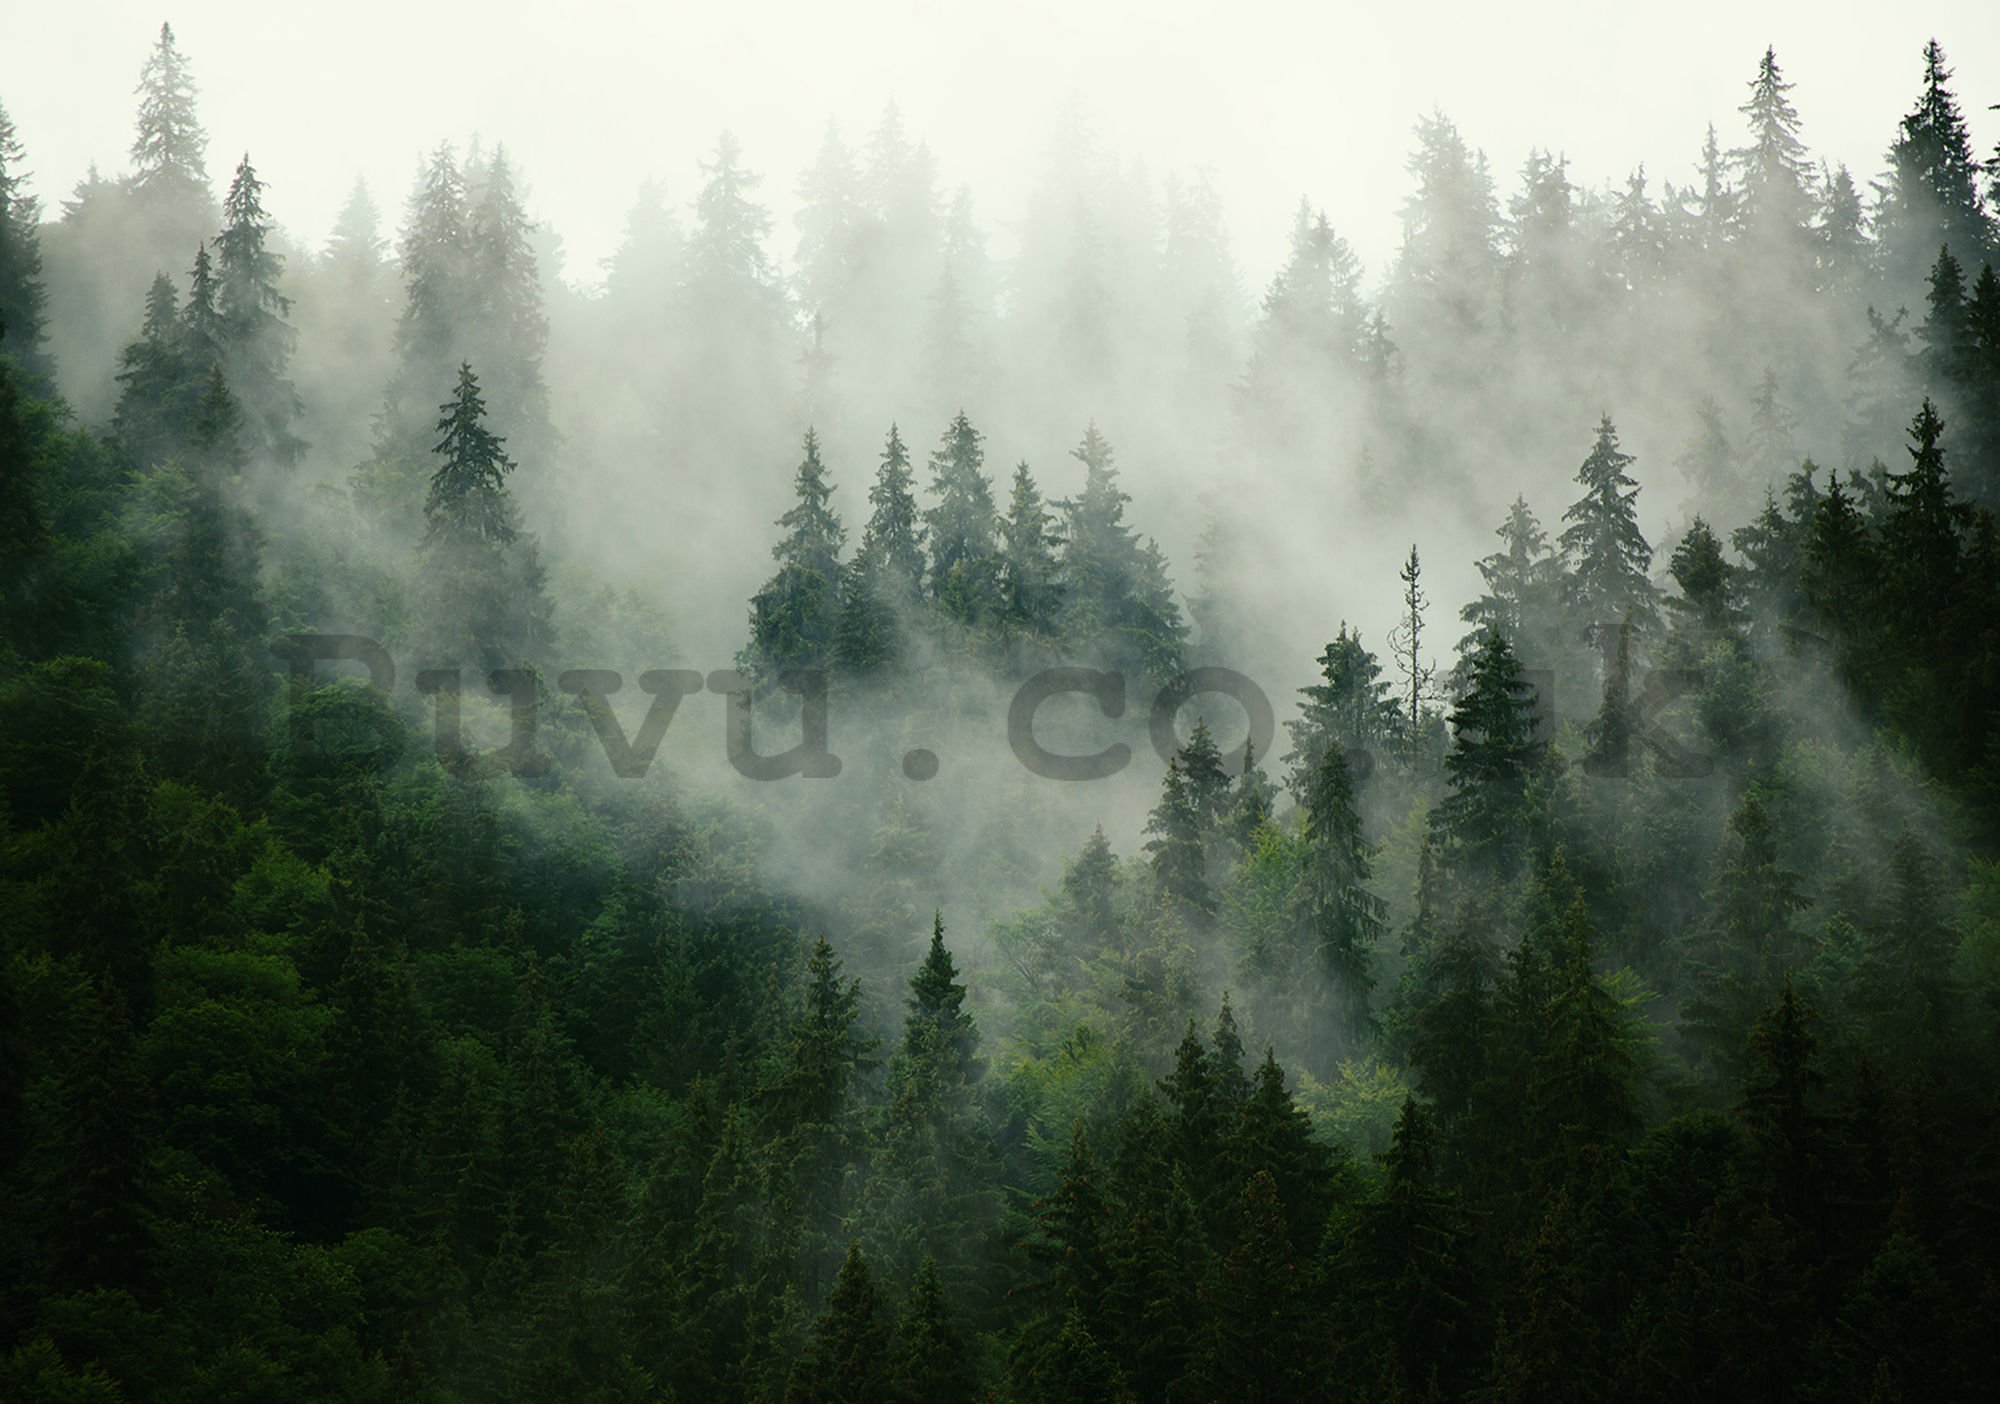 Wall mural vlies: Fog over the forest (1) - 416x254 cm